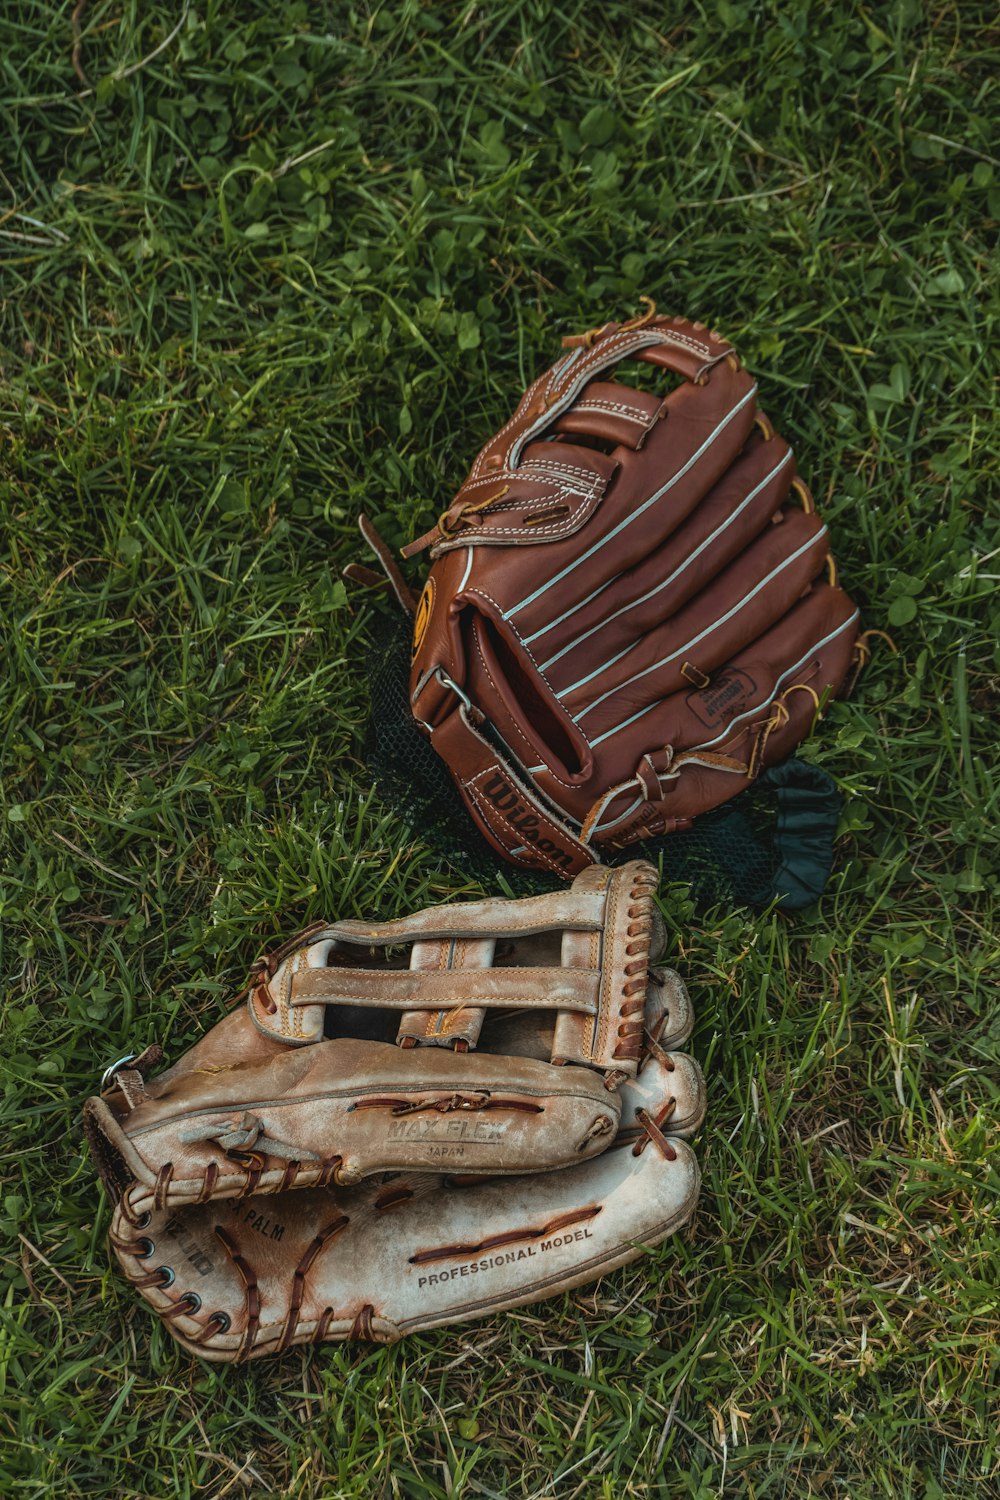 a baseball mitt and glove laying on the grass